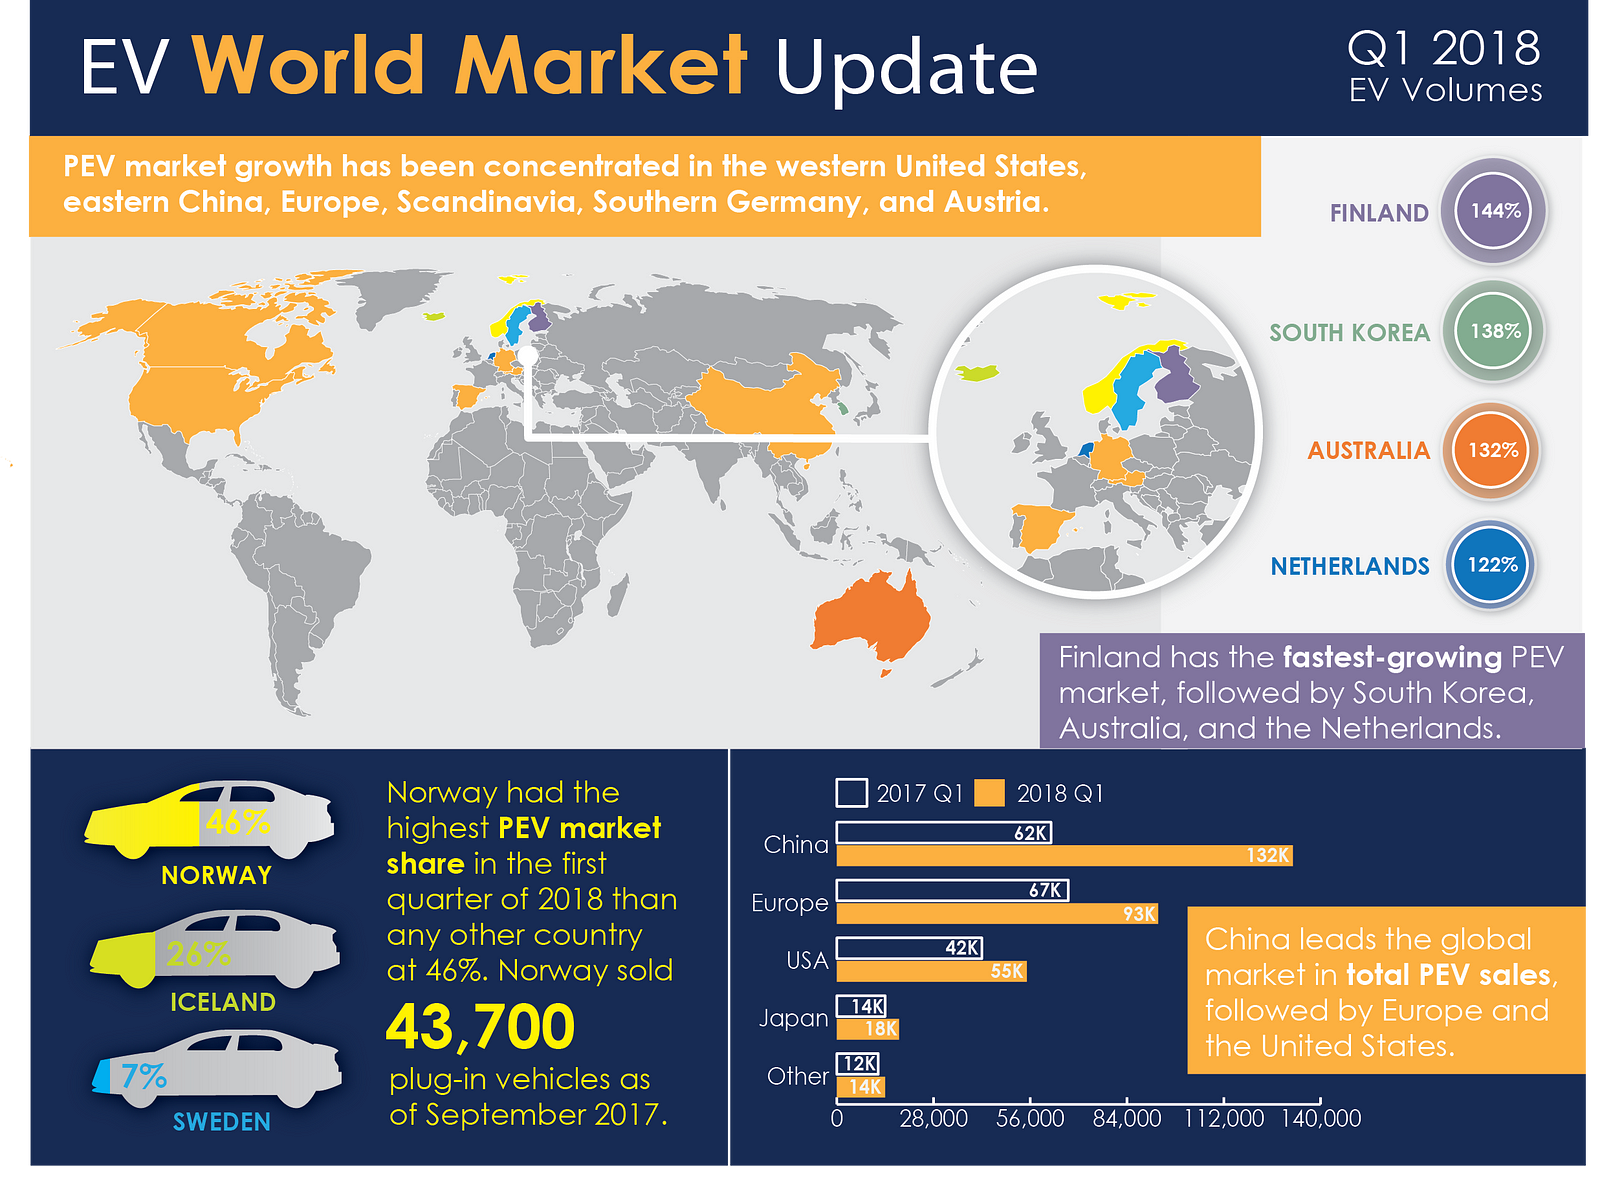 Global Electric Vehicle Sales are Accelerating, but Could Tariffs and